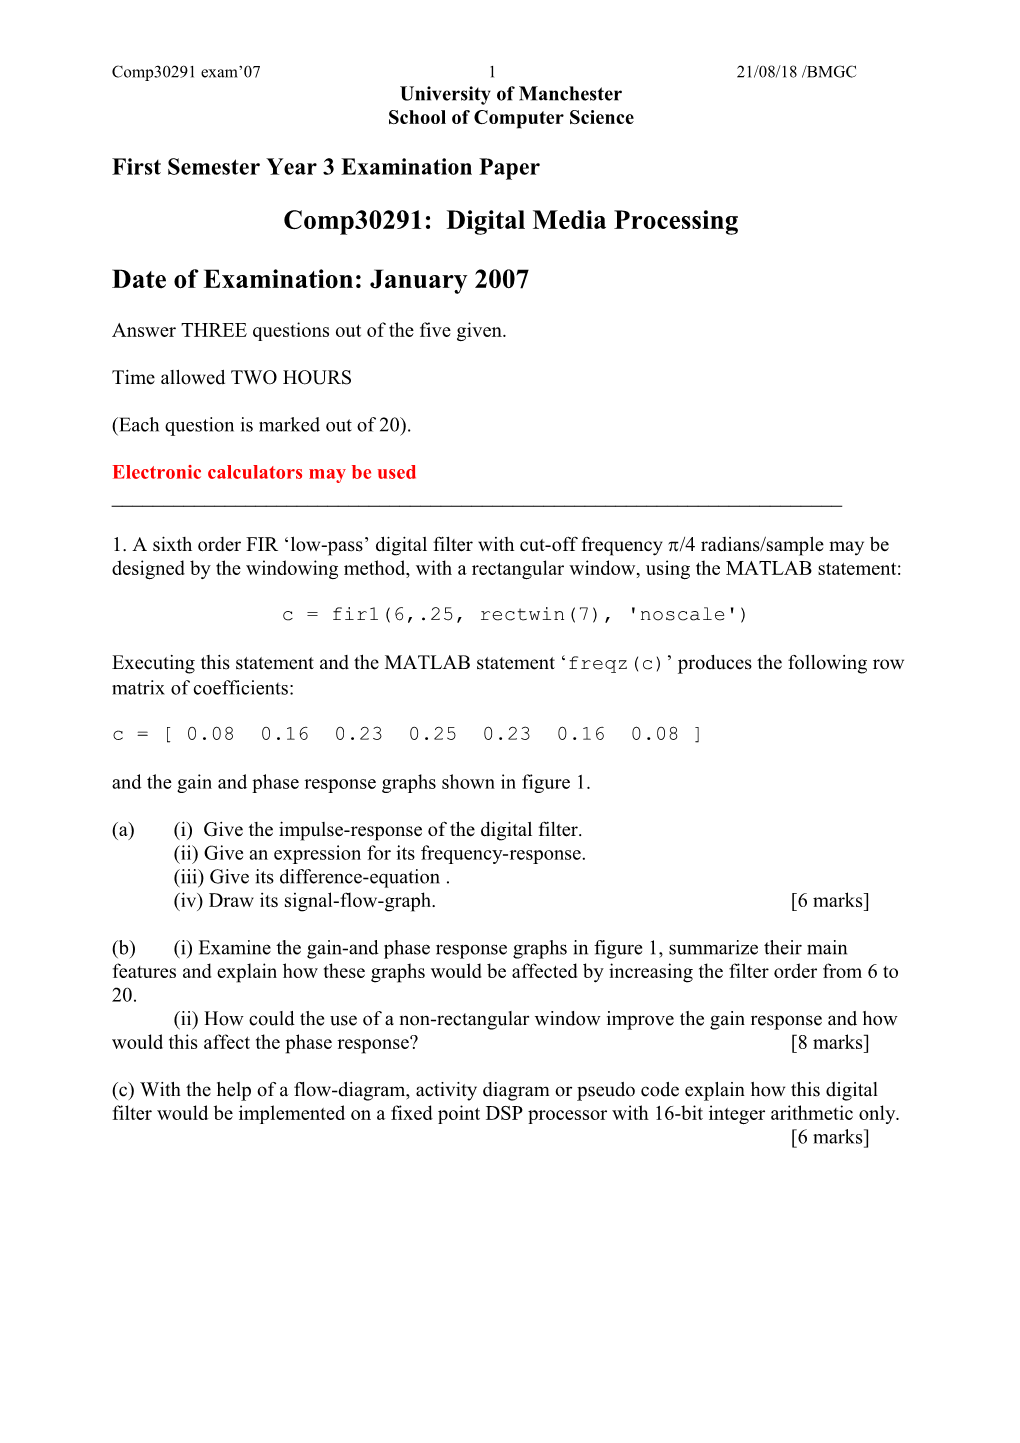 First Semester Year 3 Examination Paper